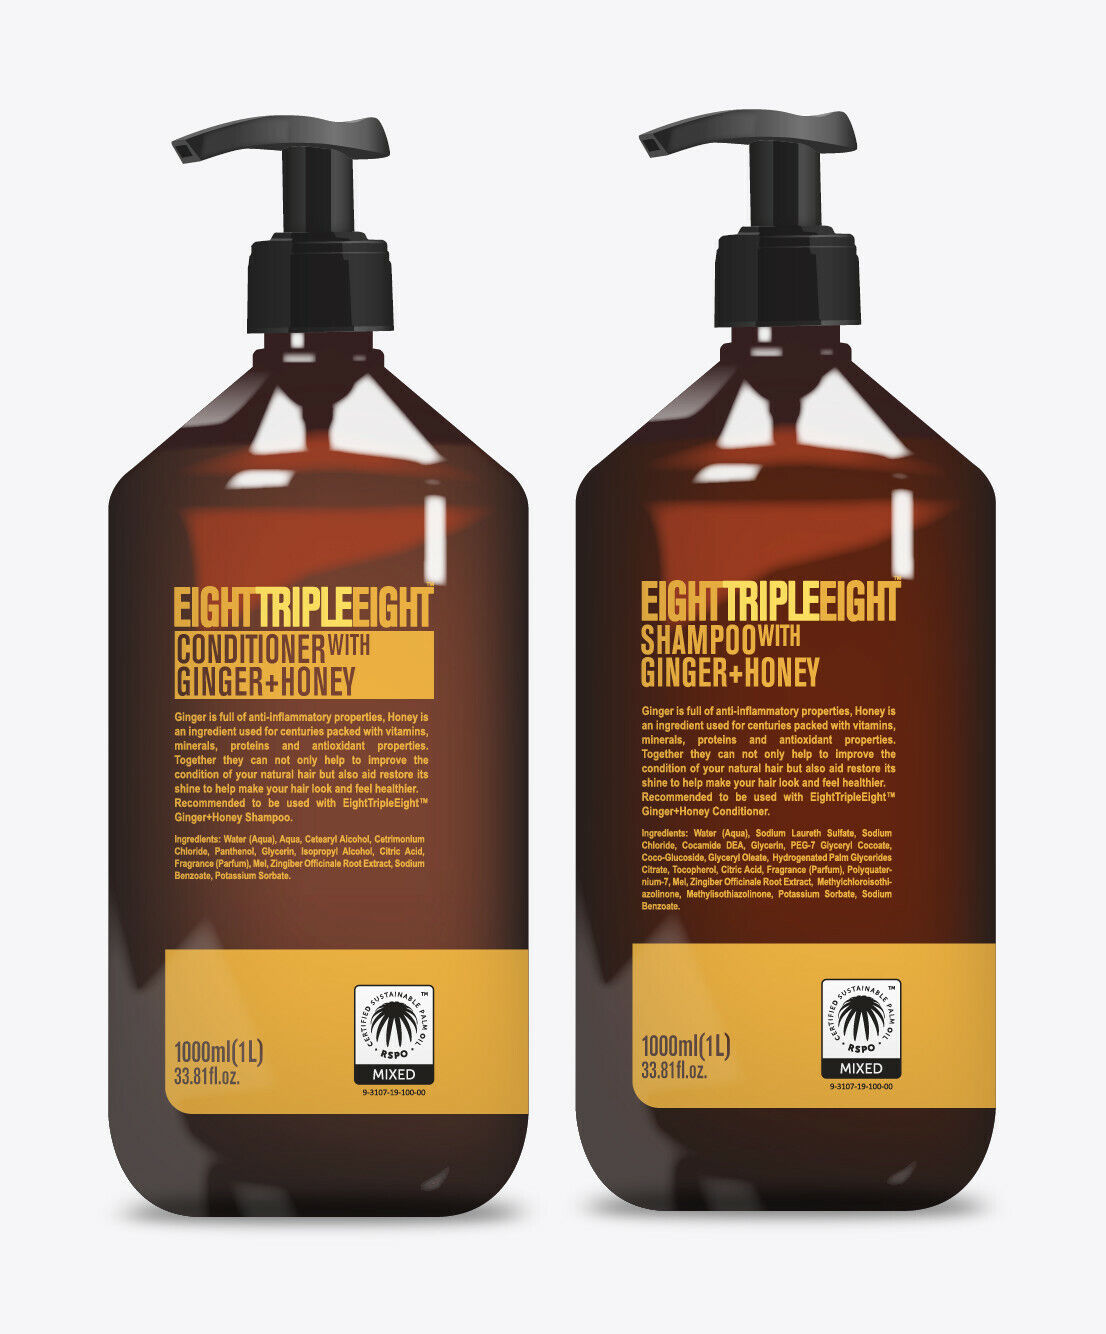 EightTripleEight Ginger + Honey Hair Care Set- 1L Shampoo & 1L Conditioner